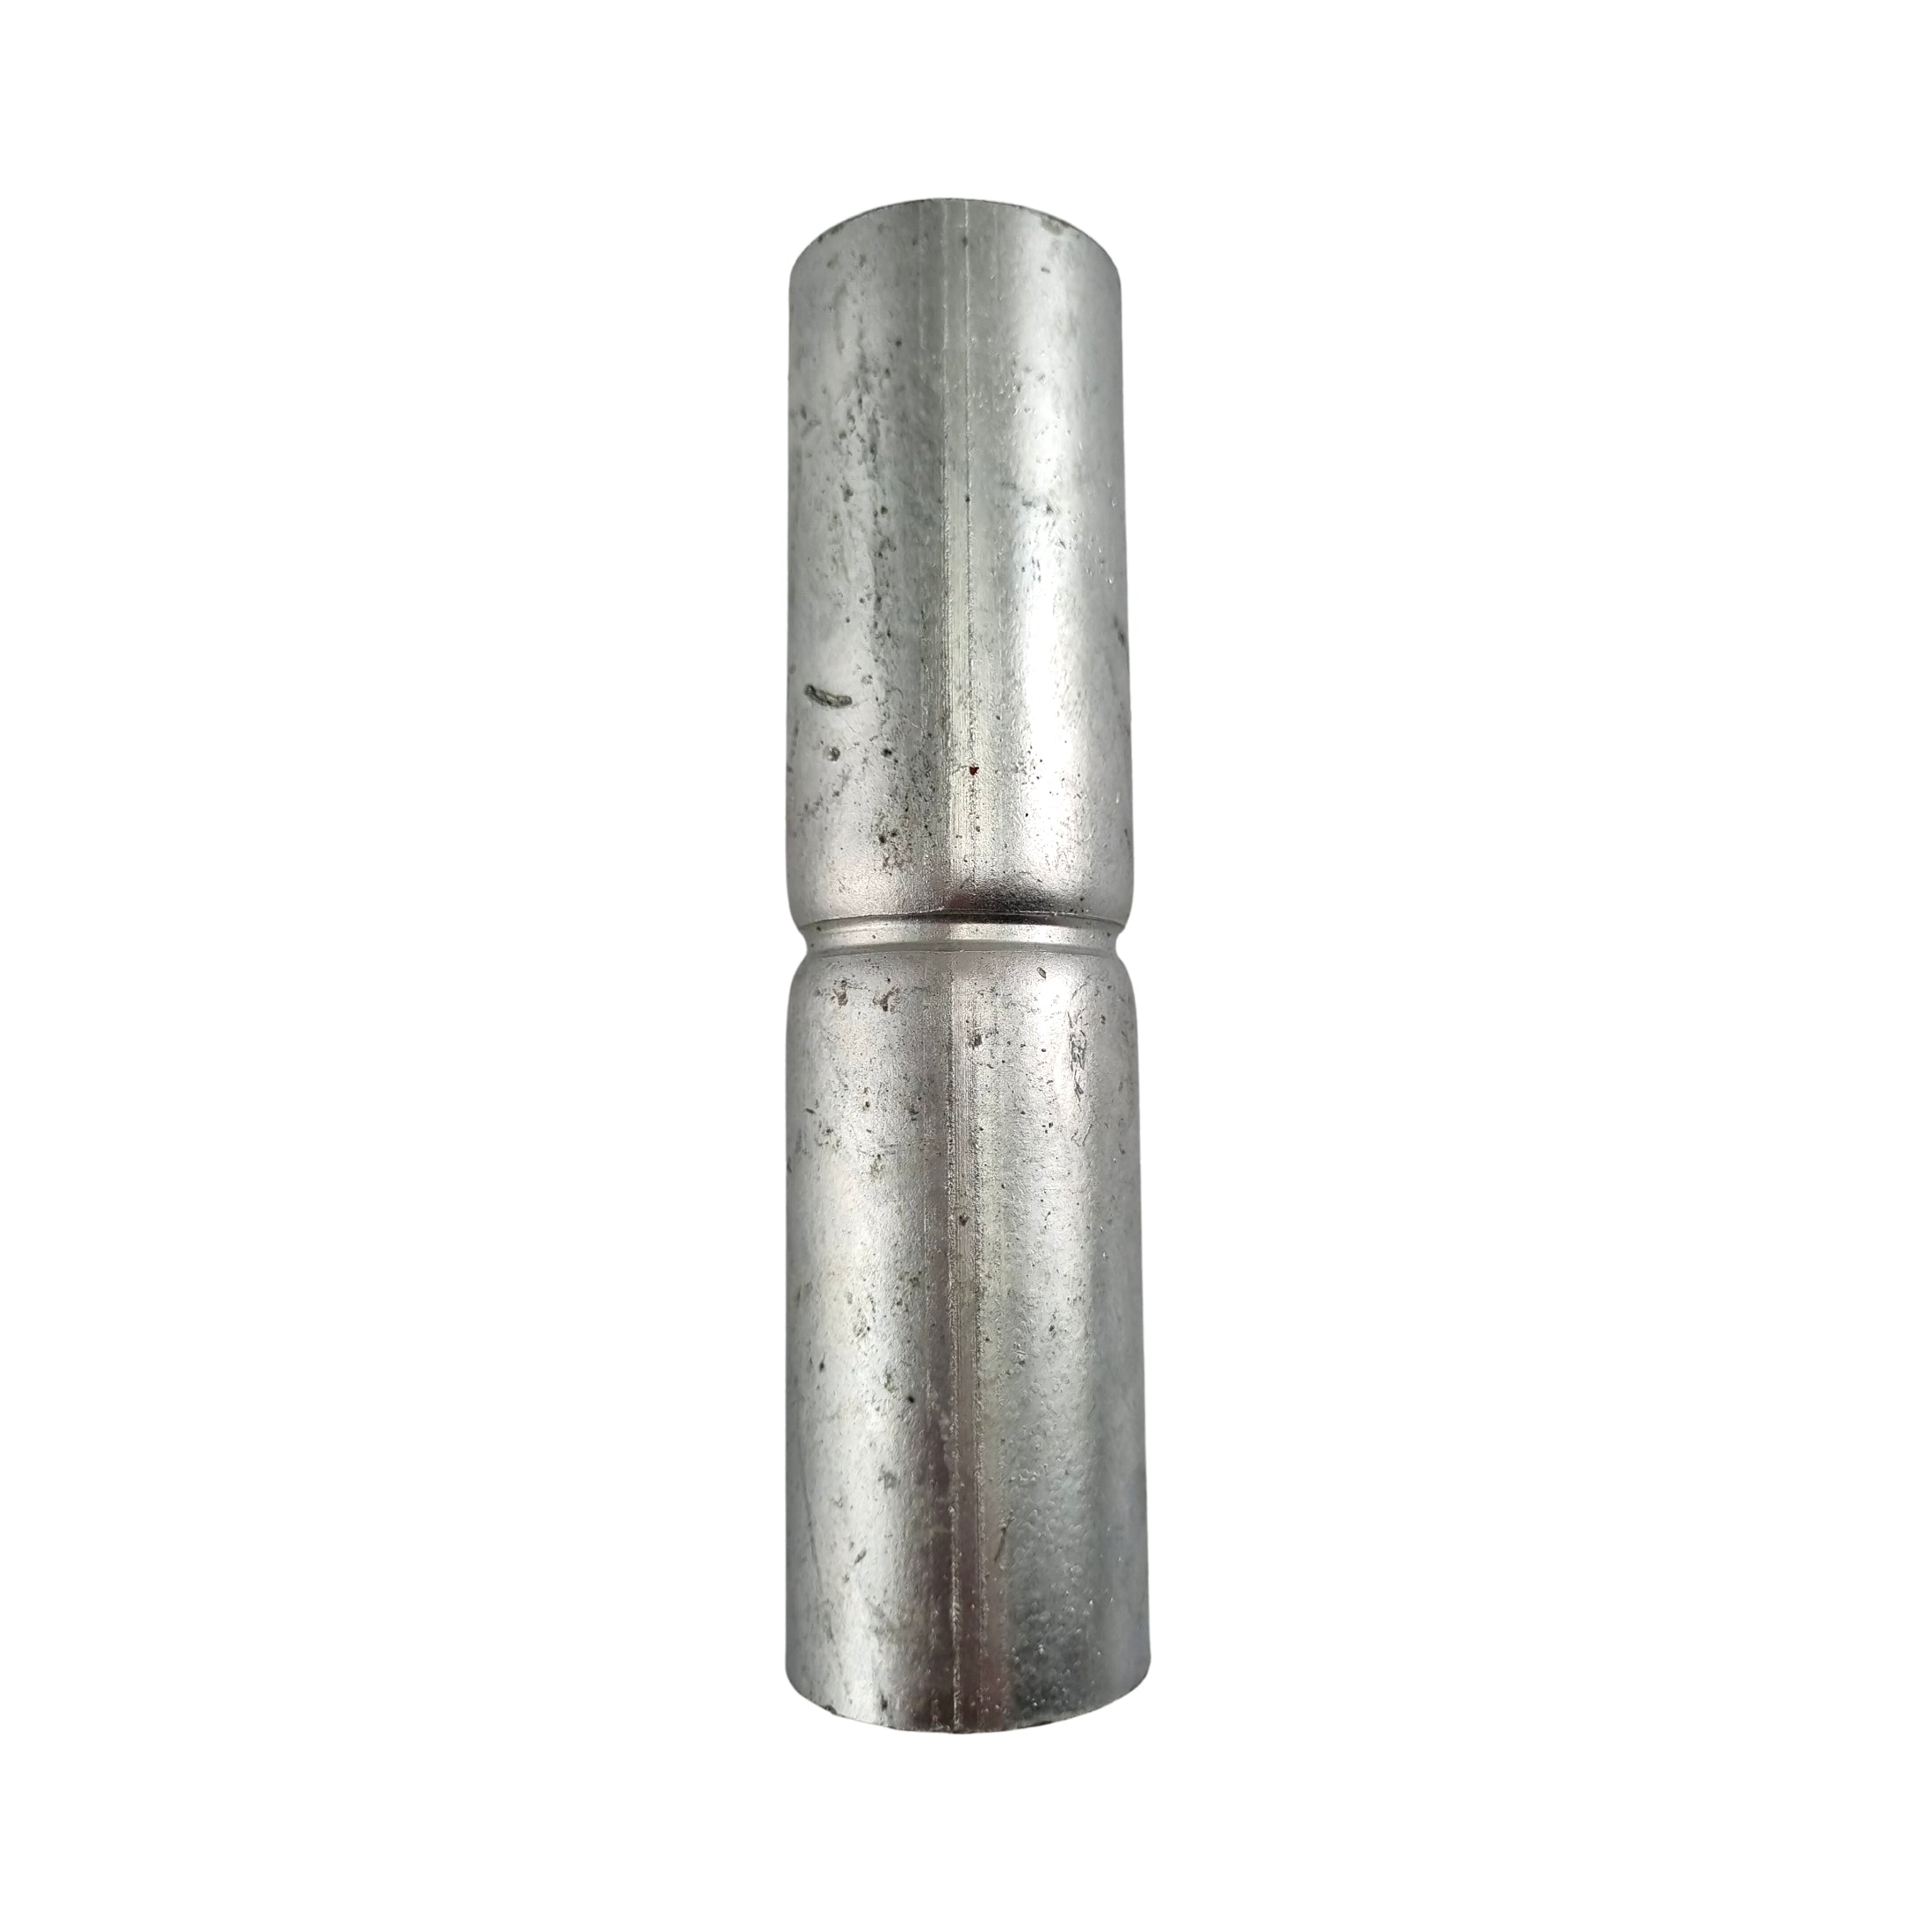 Speedee Sleeve - External Pipe Joiner Galvanised. Various sizes. Shop Fence & Gate Fittings online at chain.com.au. Shipping Australia wide.